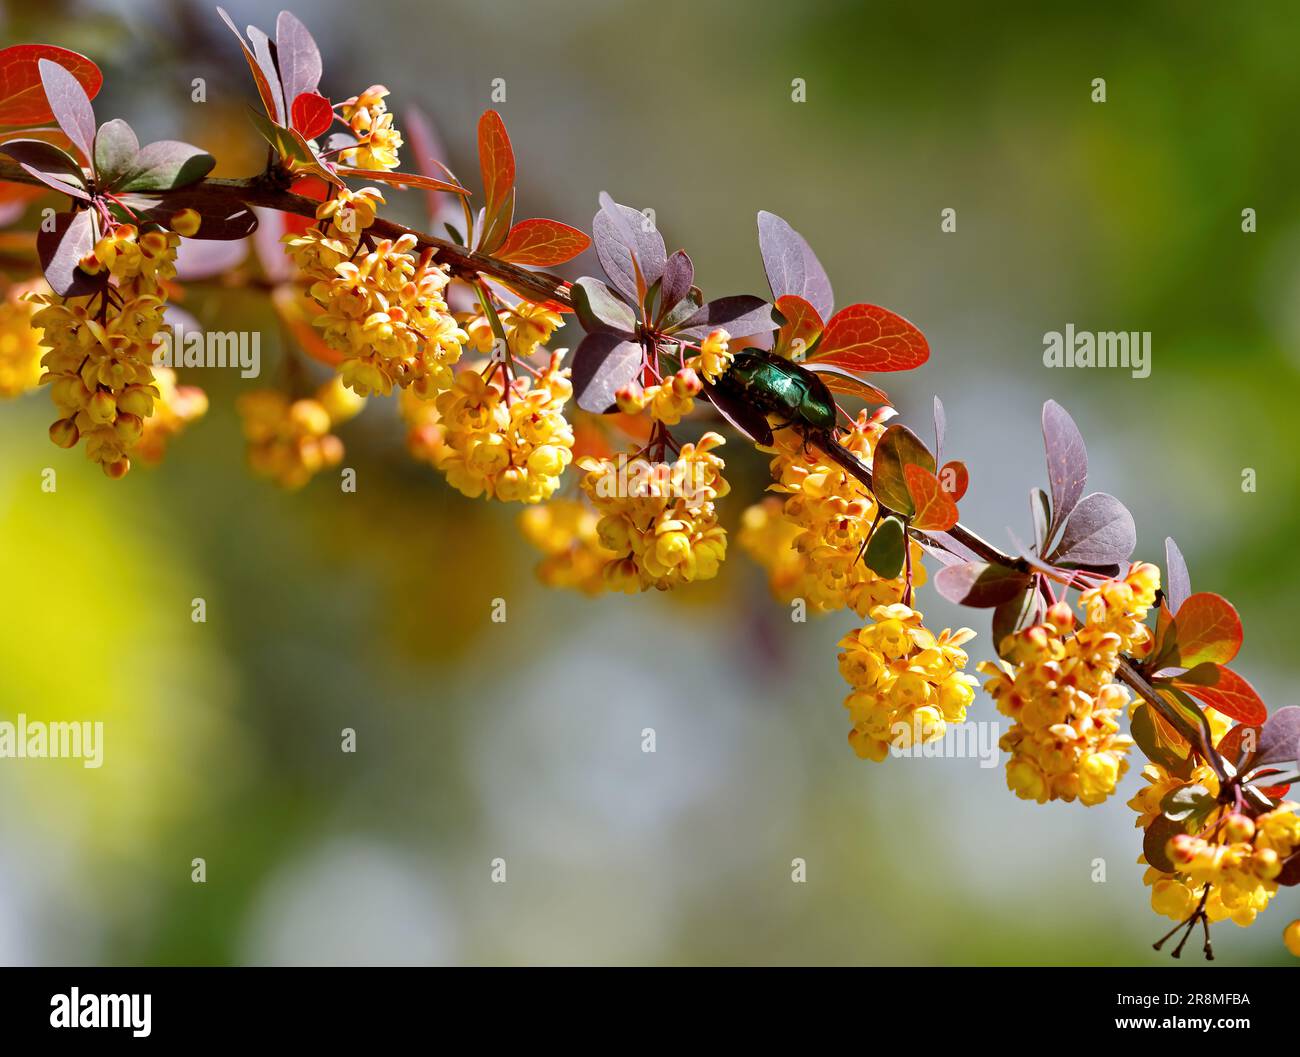 A shiny green beetle searching food on beautiful yellow barberry flowers Stock Photo